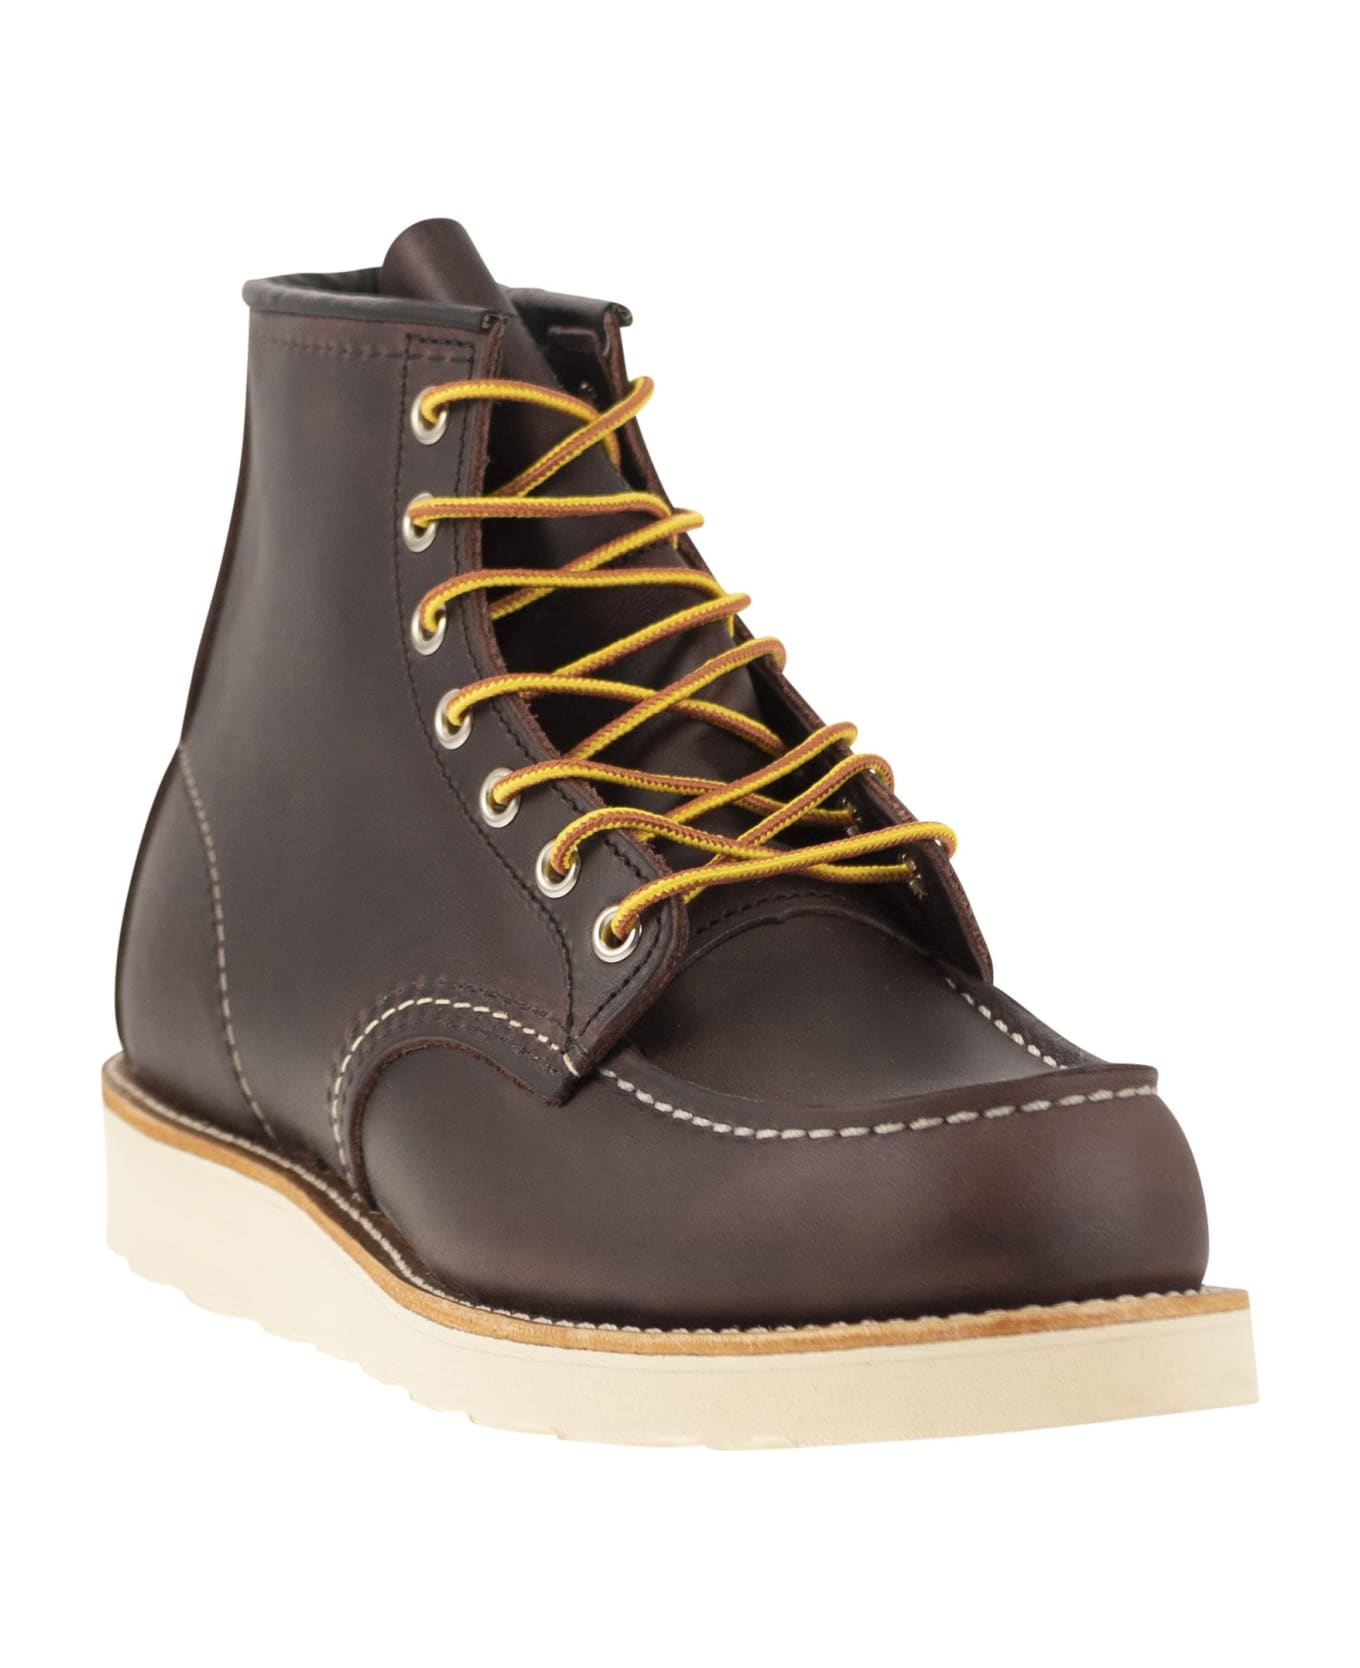 Red Wing Classic Moc - Leather Boot With Laces - Burgundy ブーツ